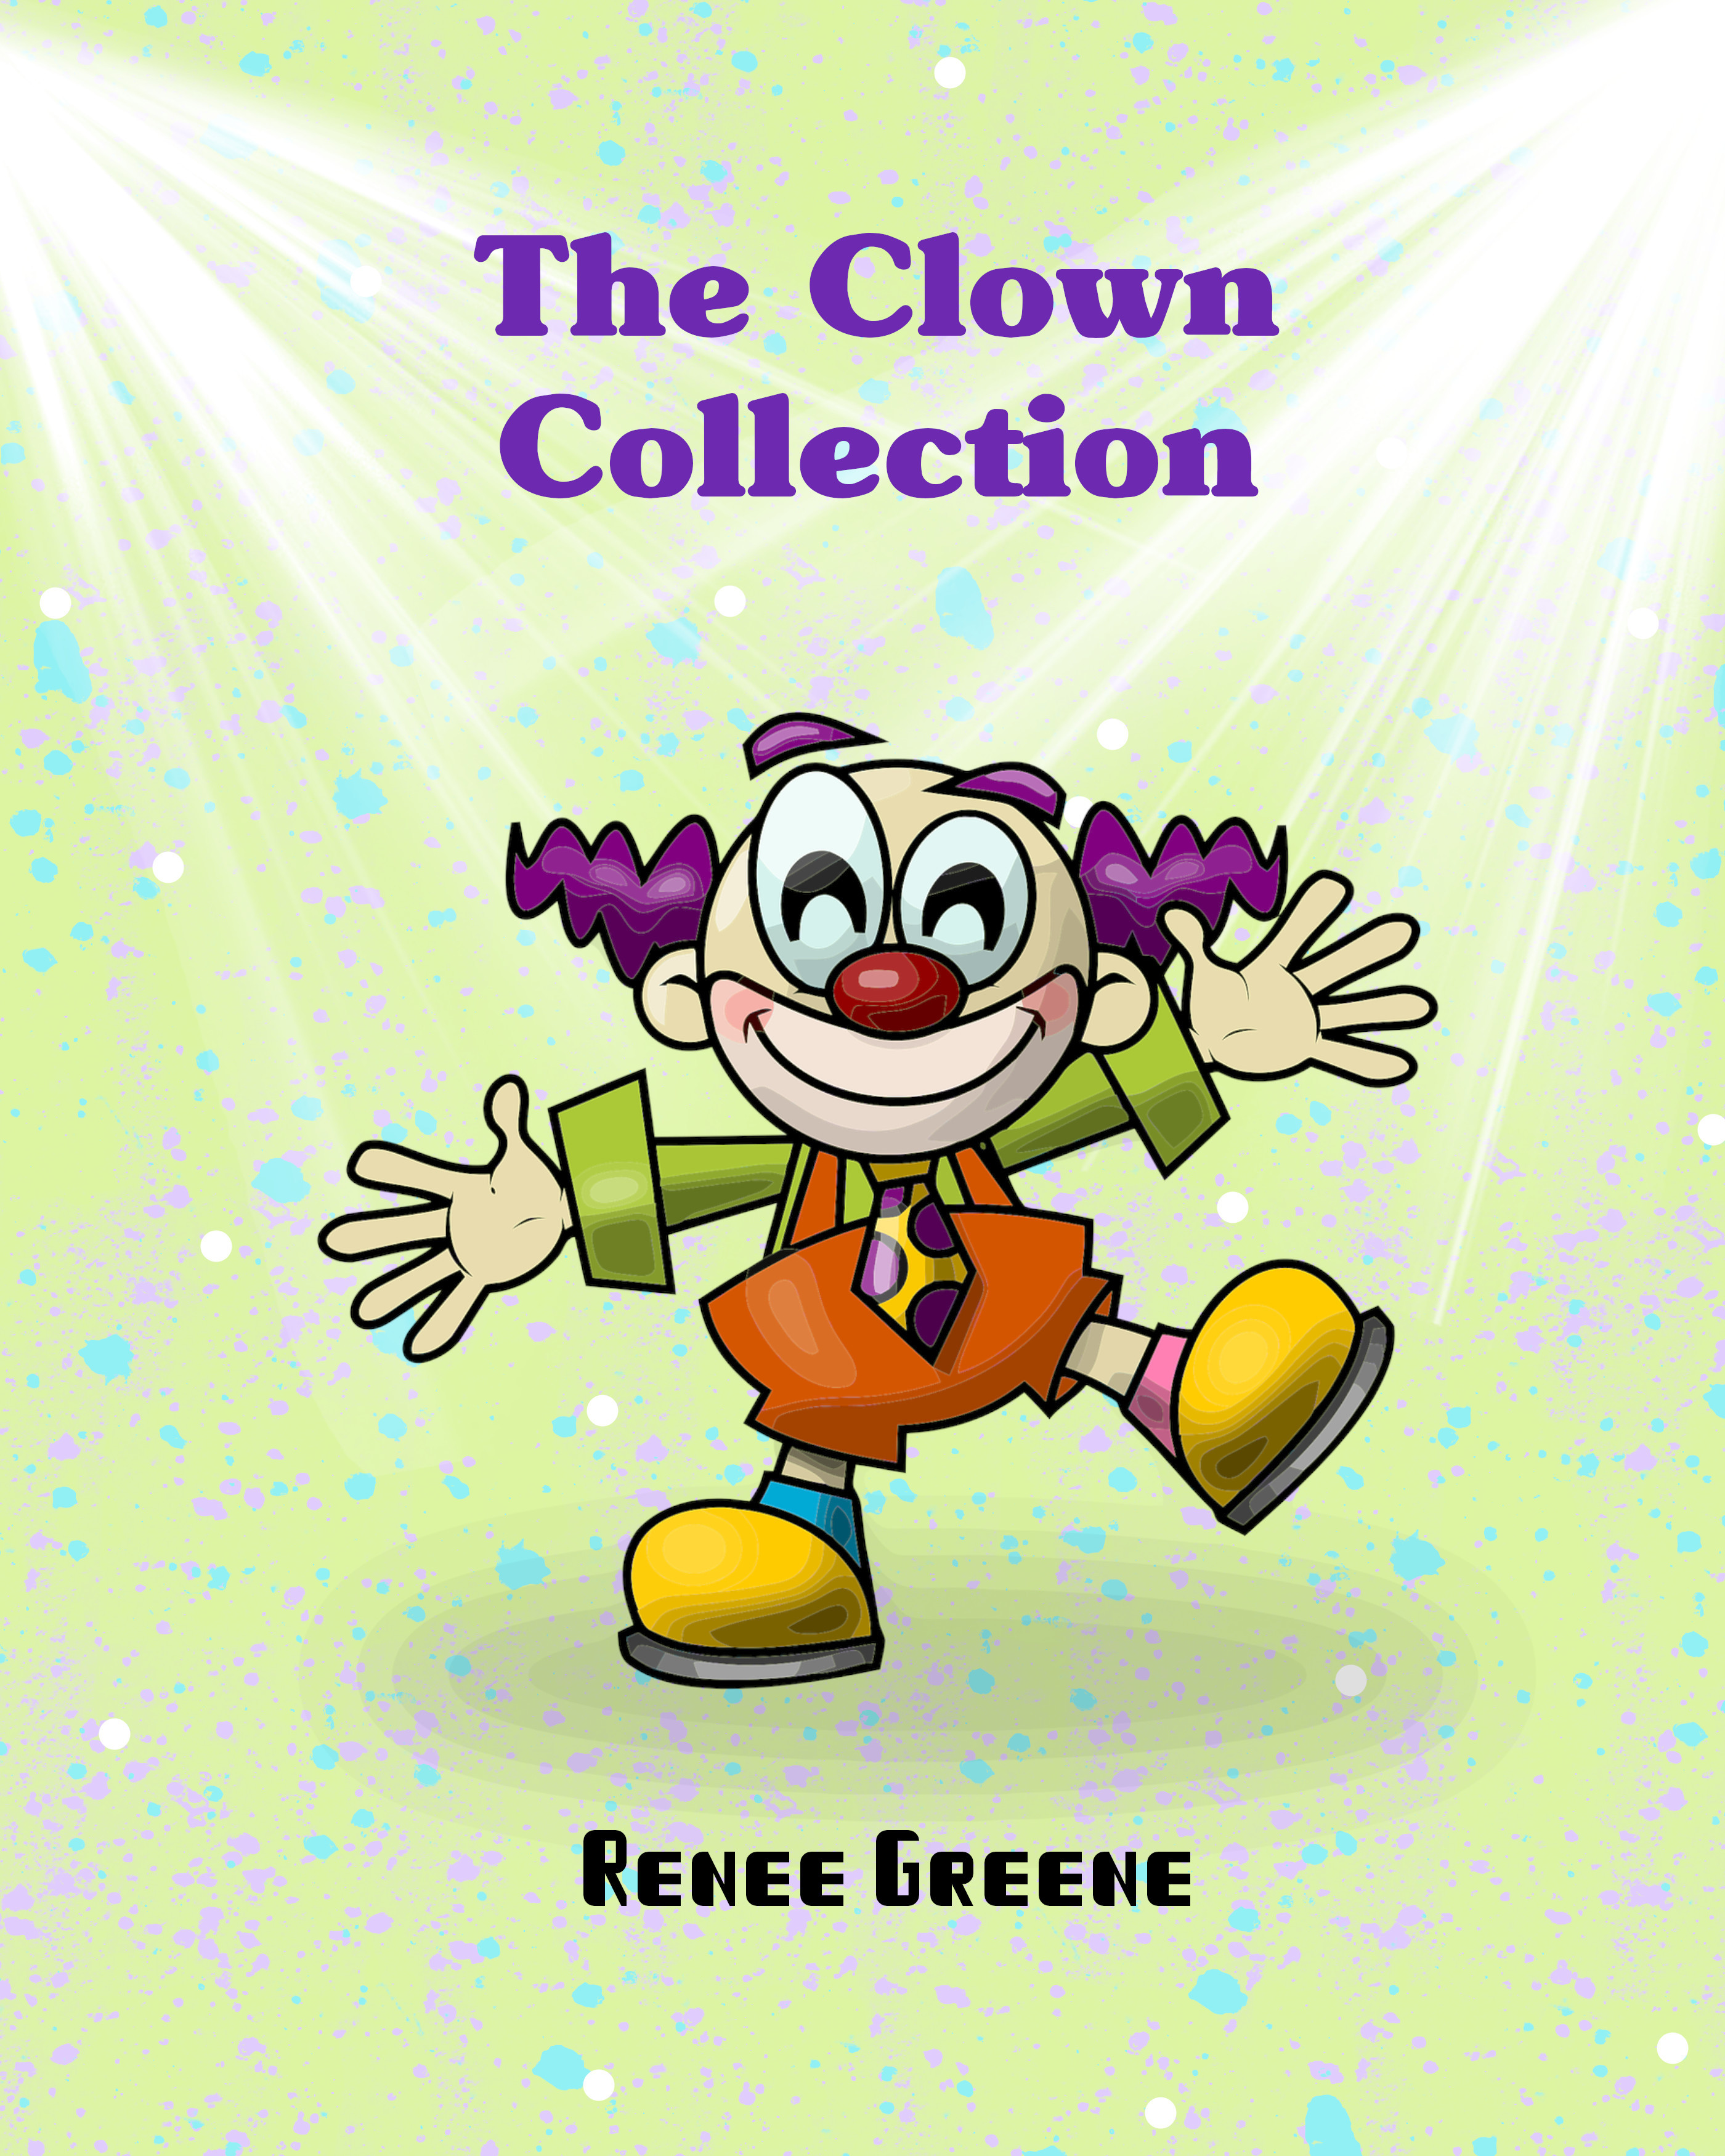 The Clown Collection